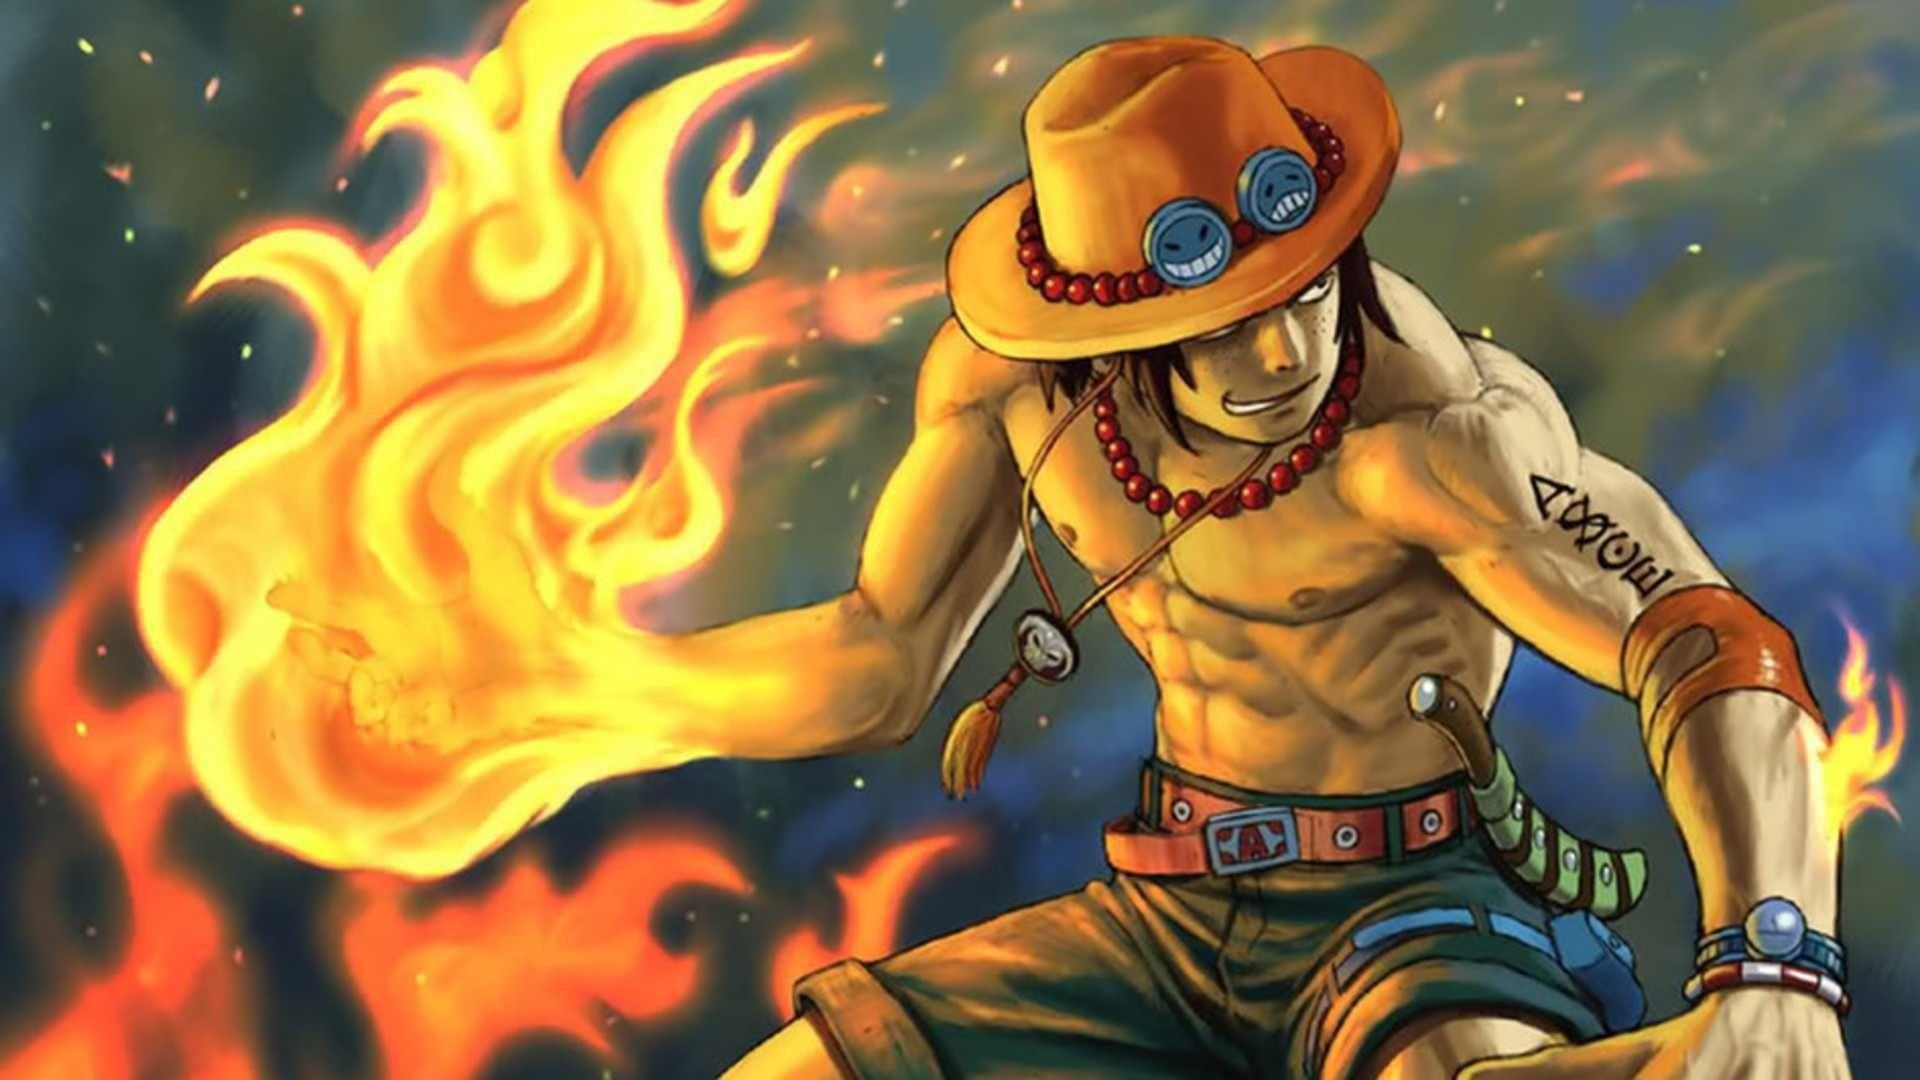 Portgas D. Ace HD Wallpaper and Background Image